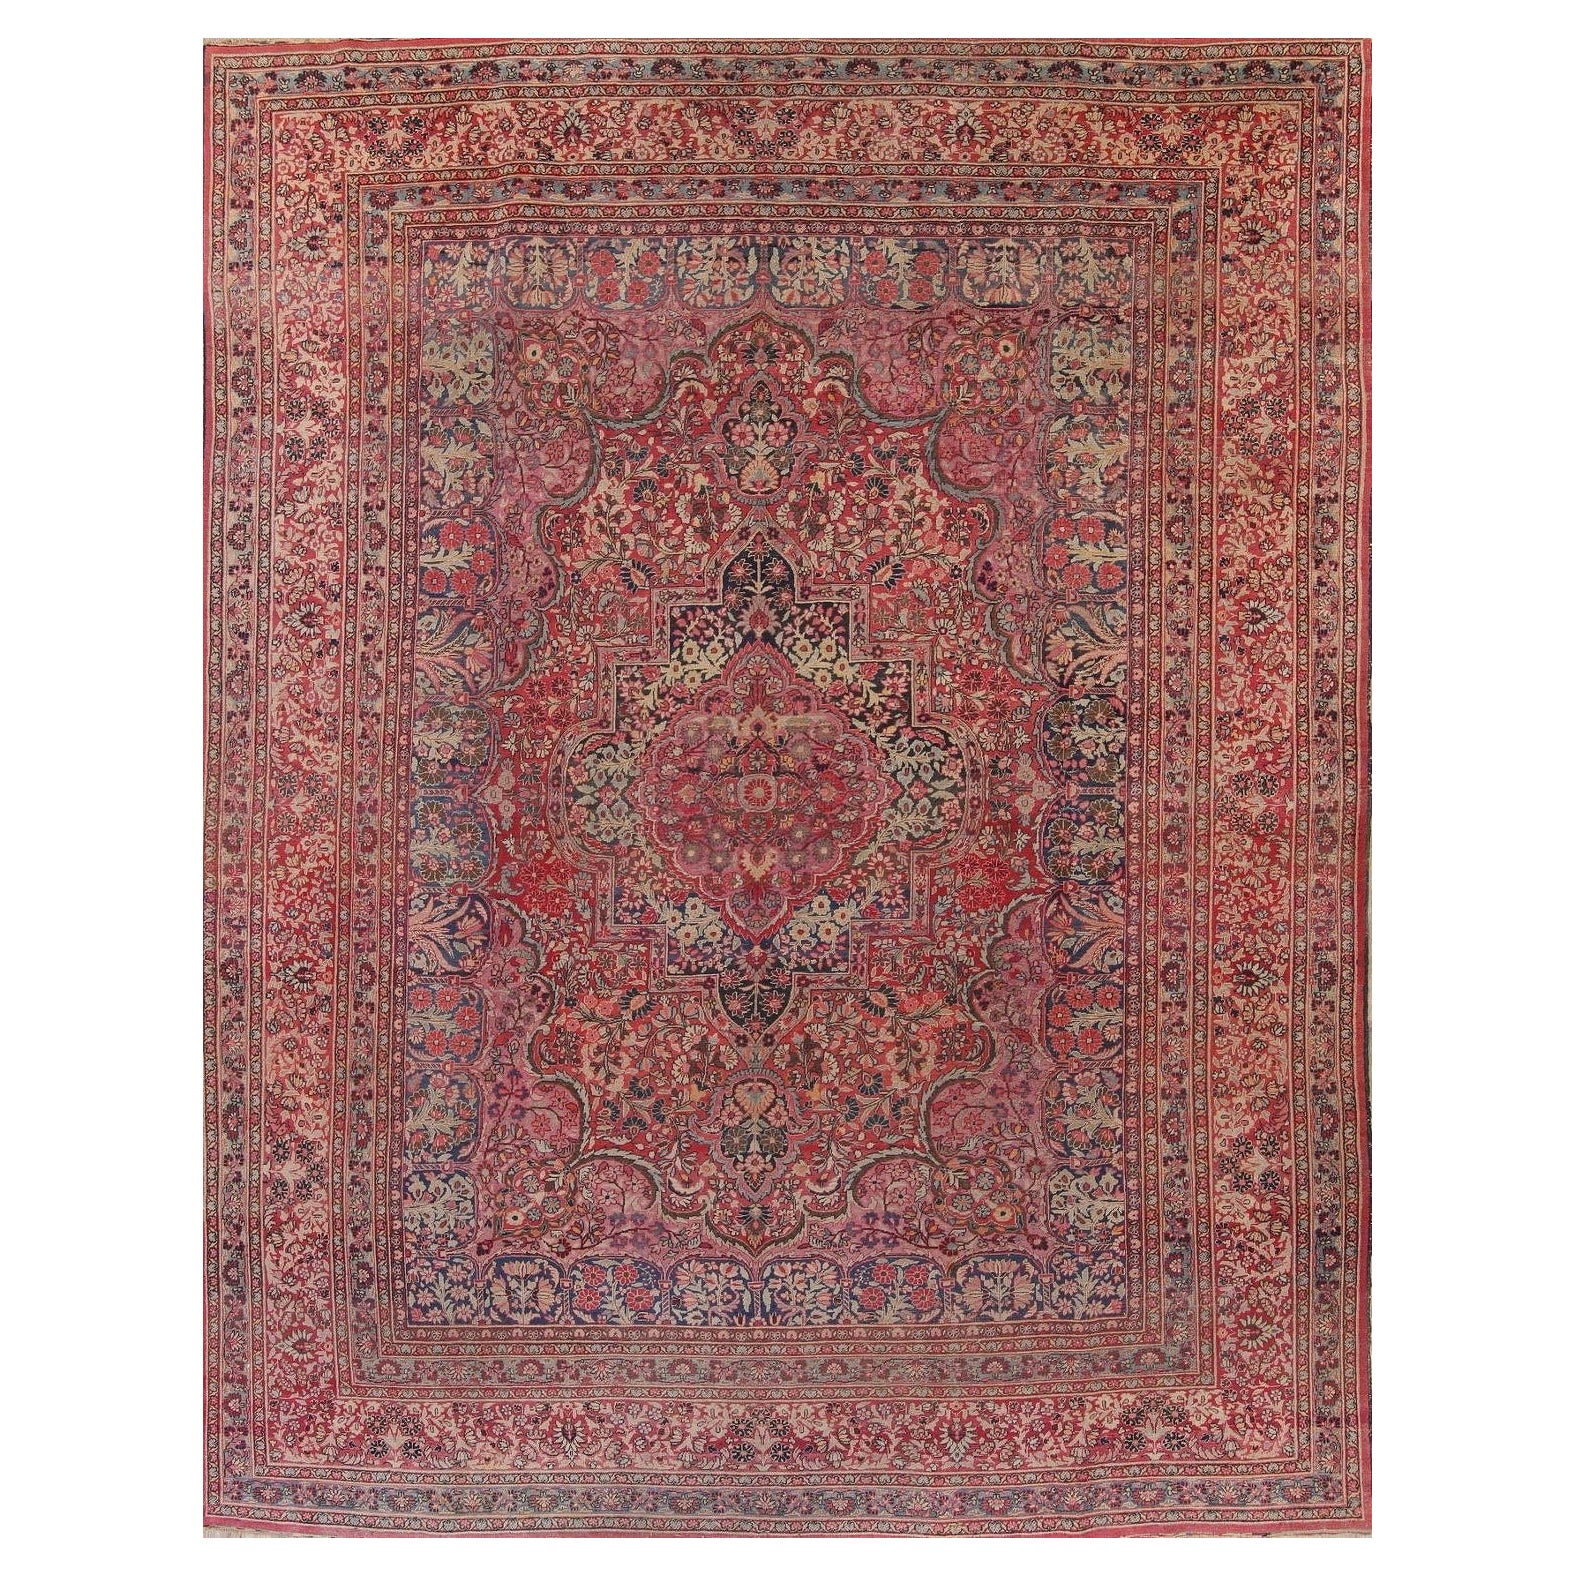 Magnificent Antique Rug in Pastels with Every Color & Detail, circa 1920's